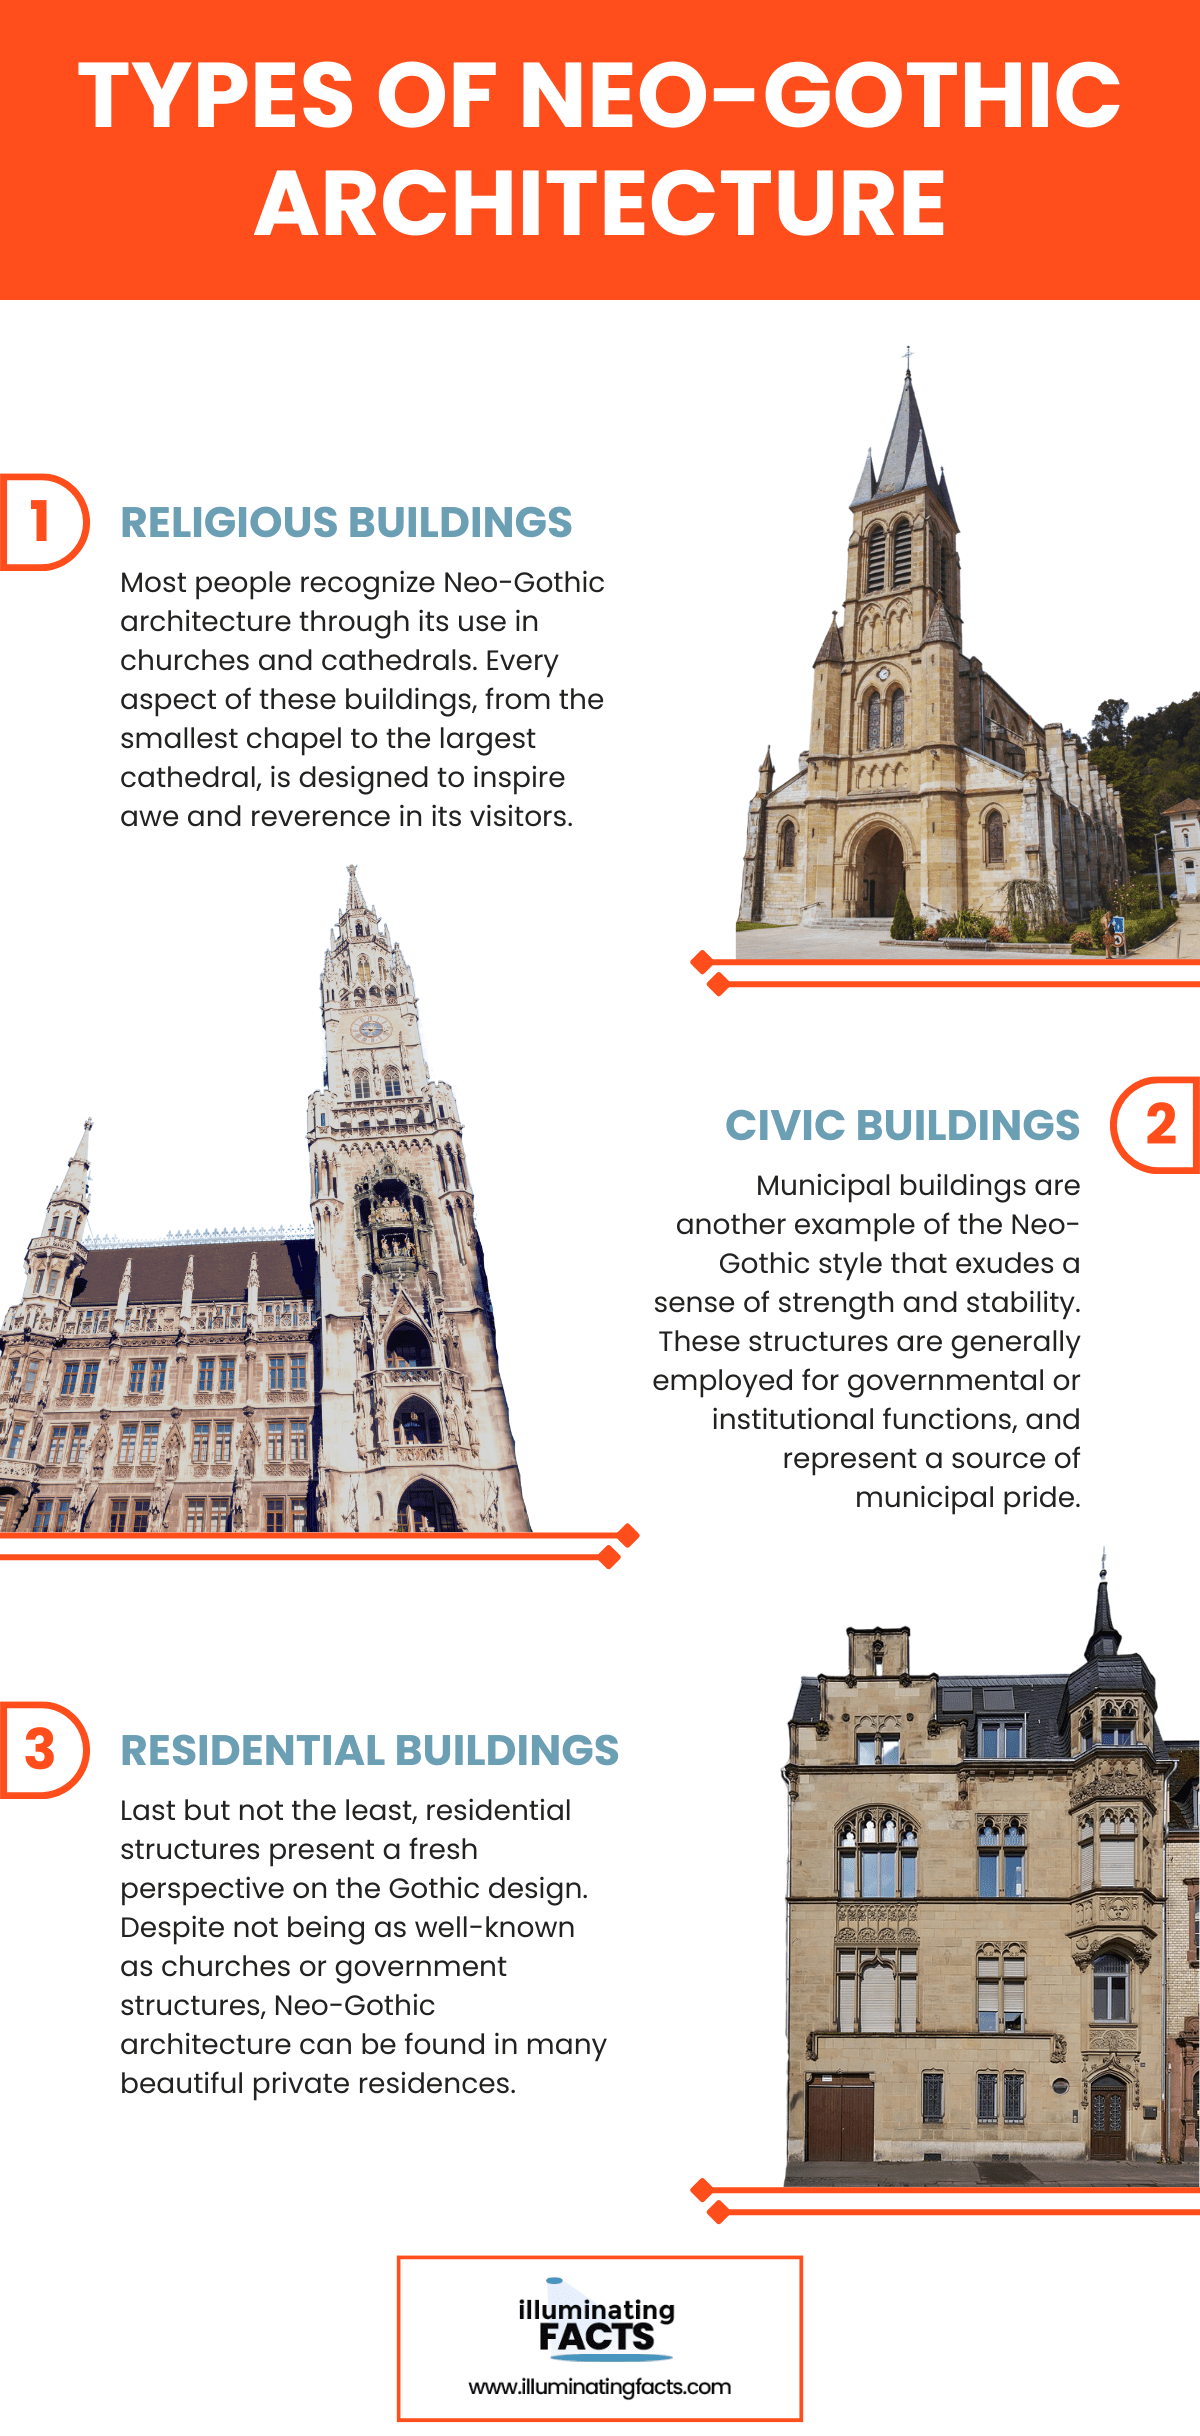 Types of Neo-Gothic Architecture